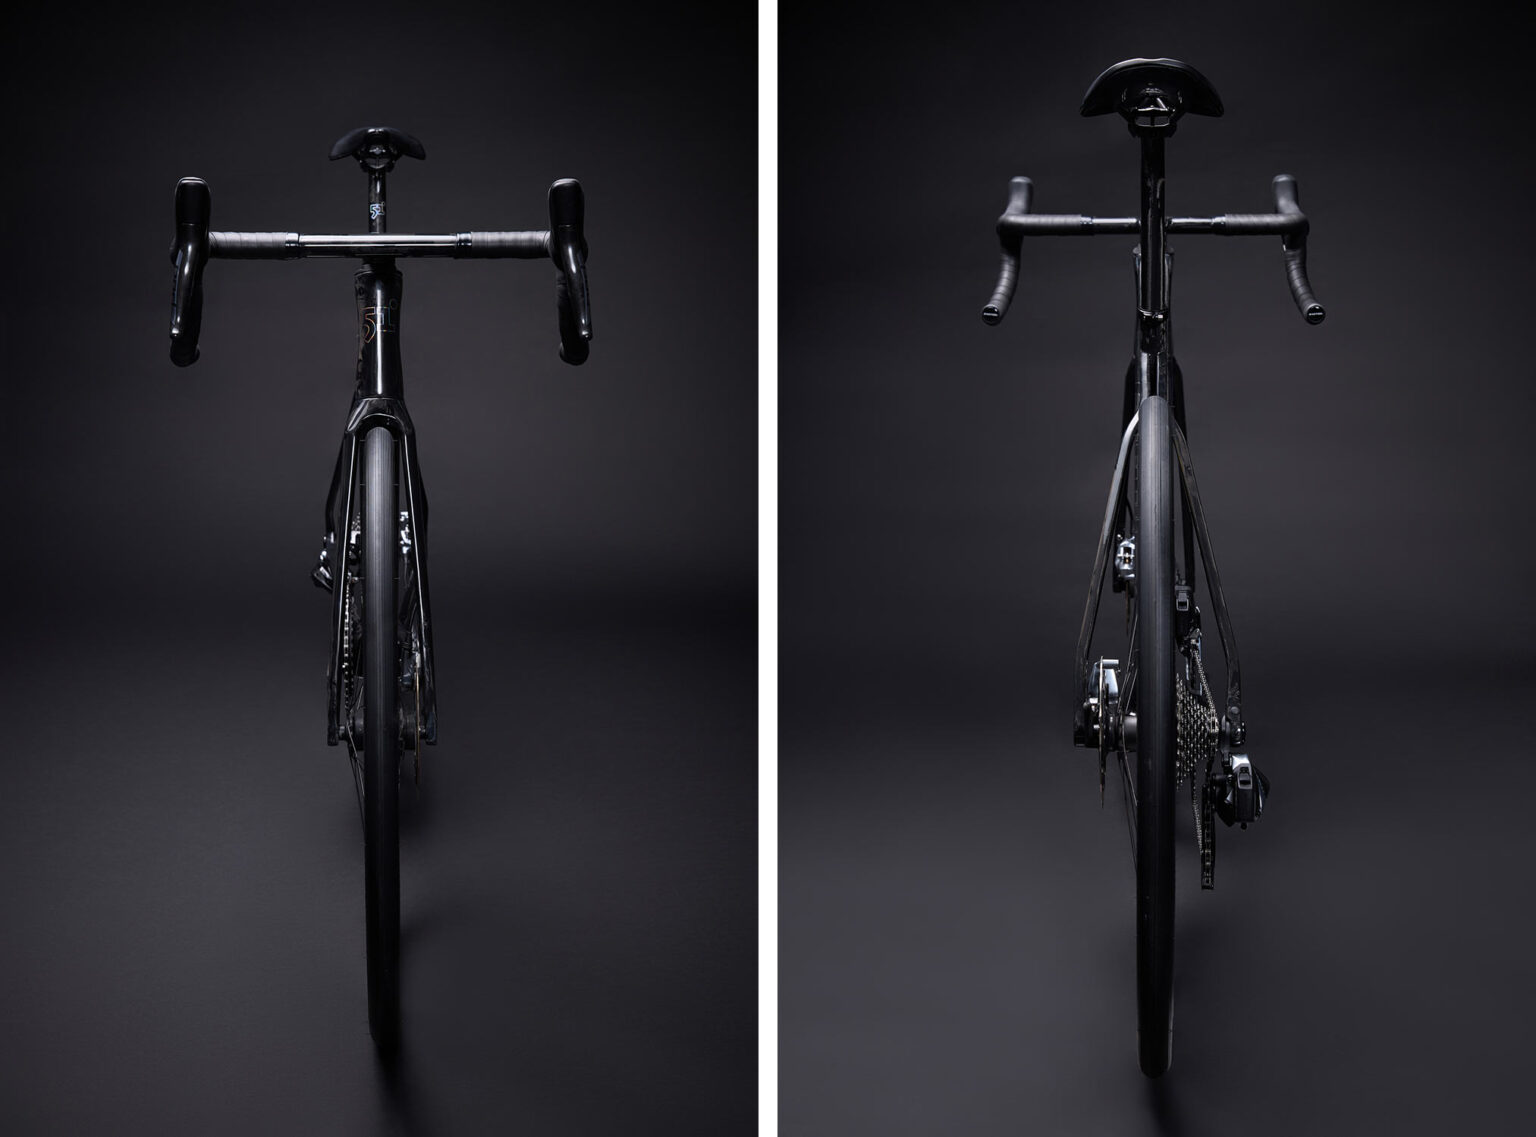 fiftyone sika road bike shown from front and rear